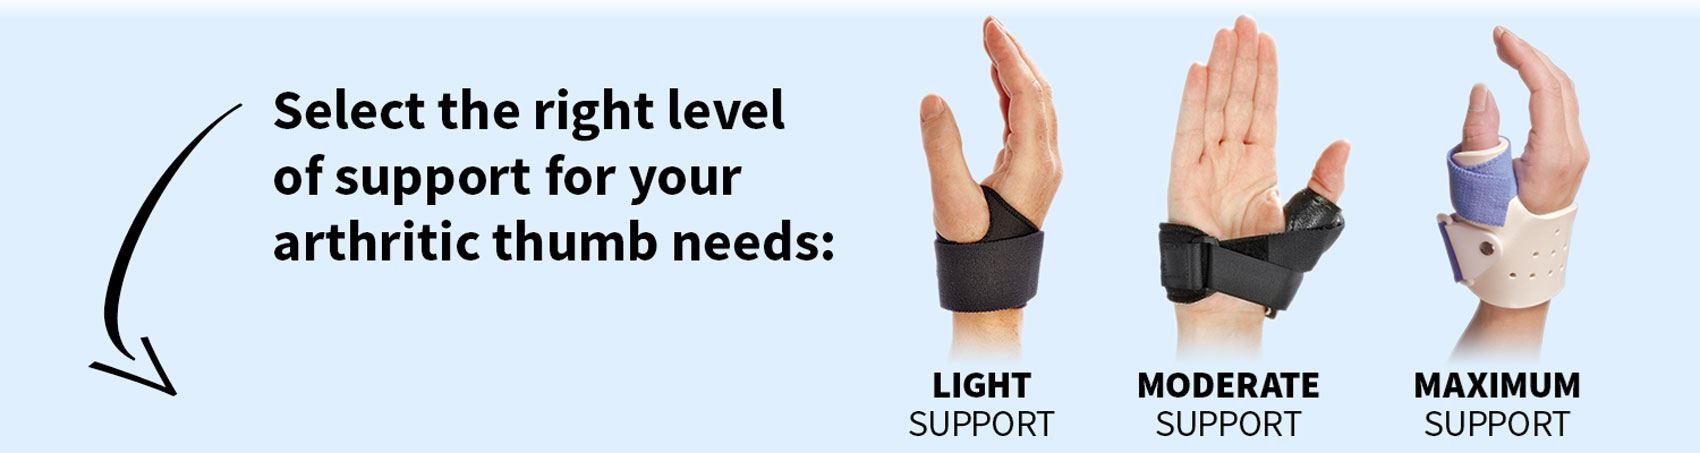 Select the right level of support for your arthritic thumb needs